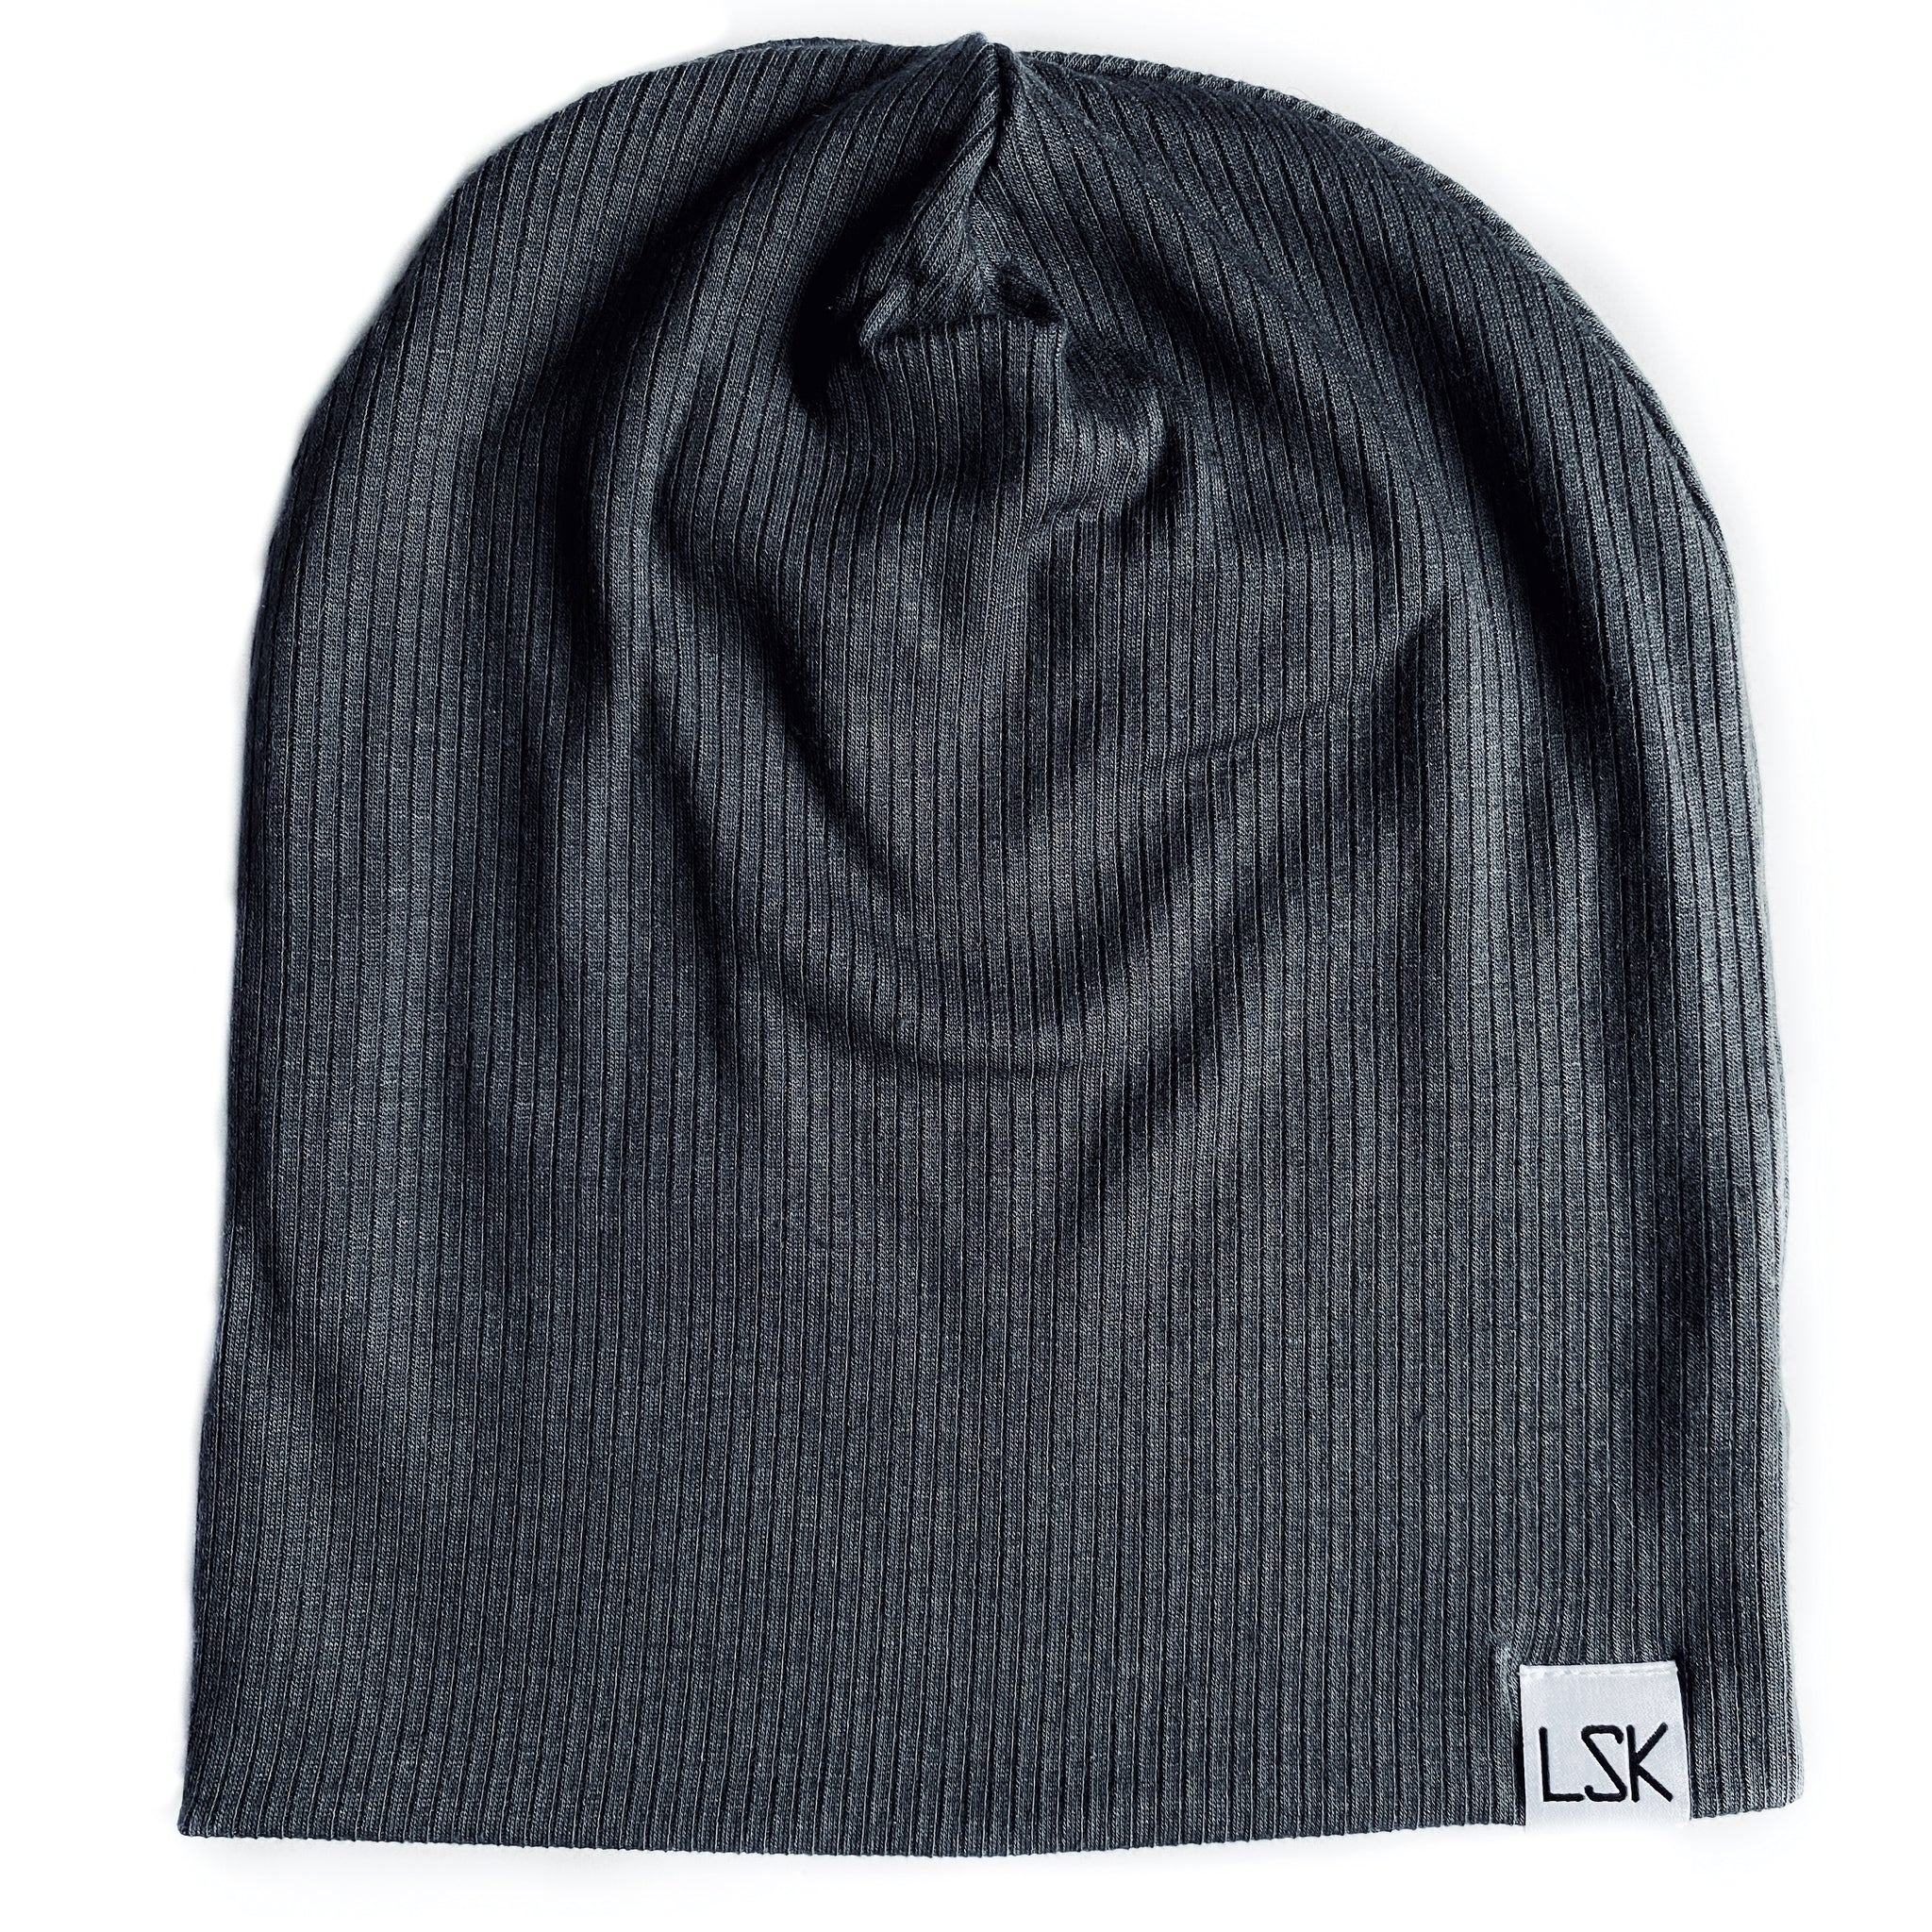 Pavement Grey Ribbed Adult Slouchy Beanie